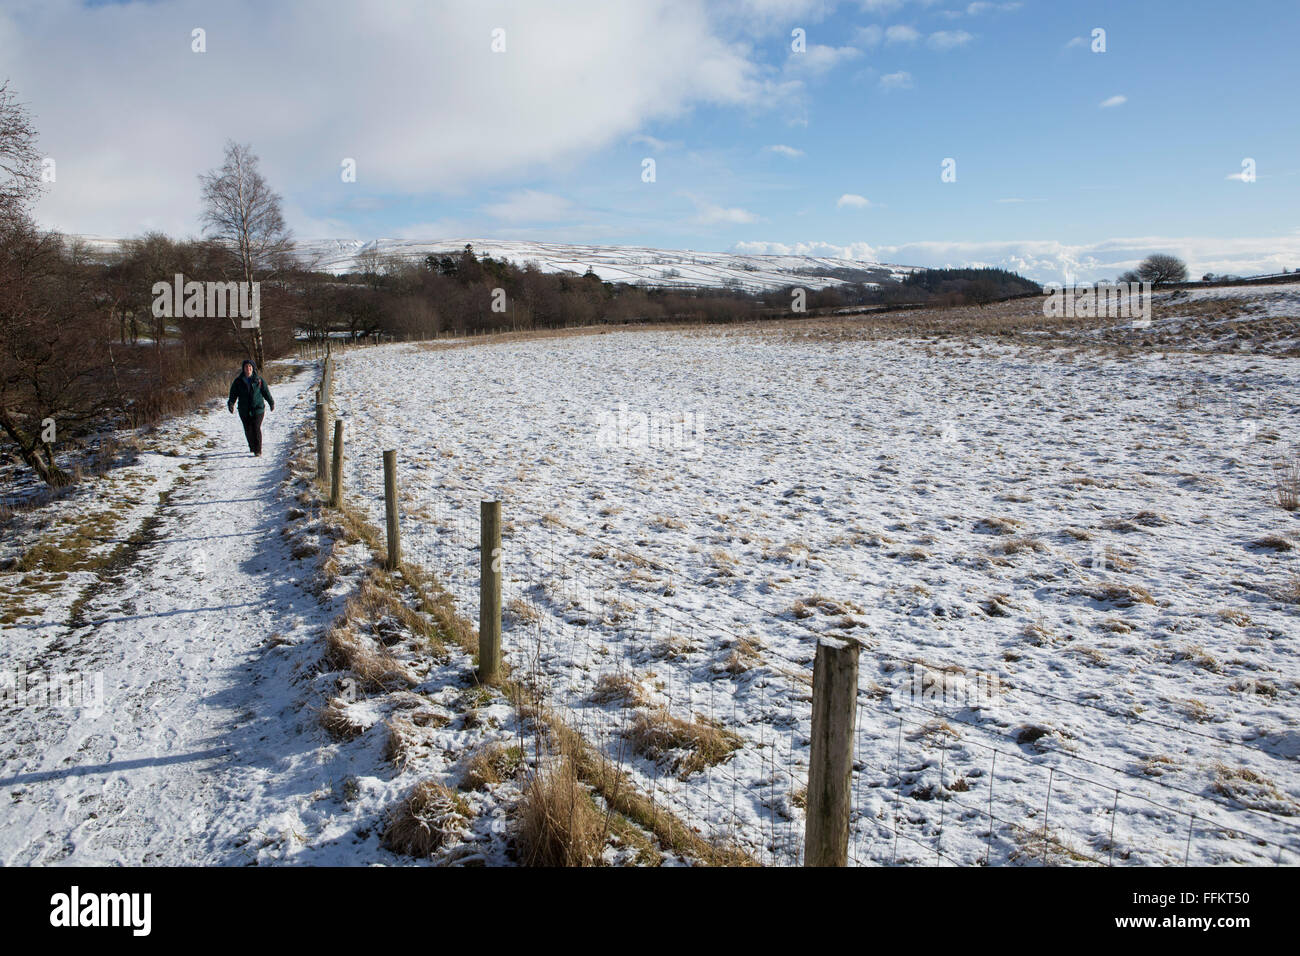 A woman walking on the Pennine Way at Upper Teesdale in County Durham, England. Snow dusts the landscape. Stock Photo